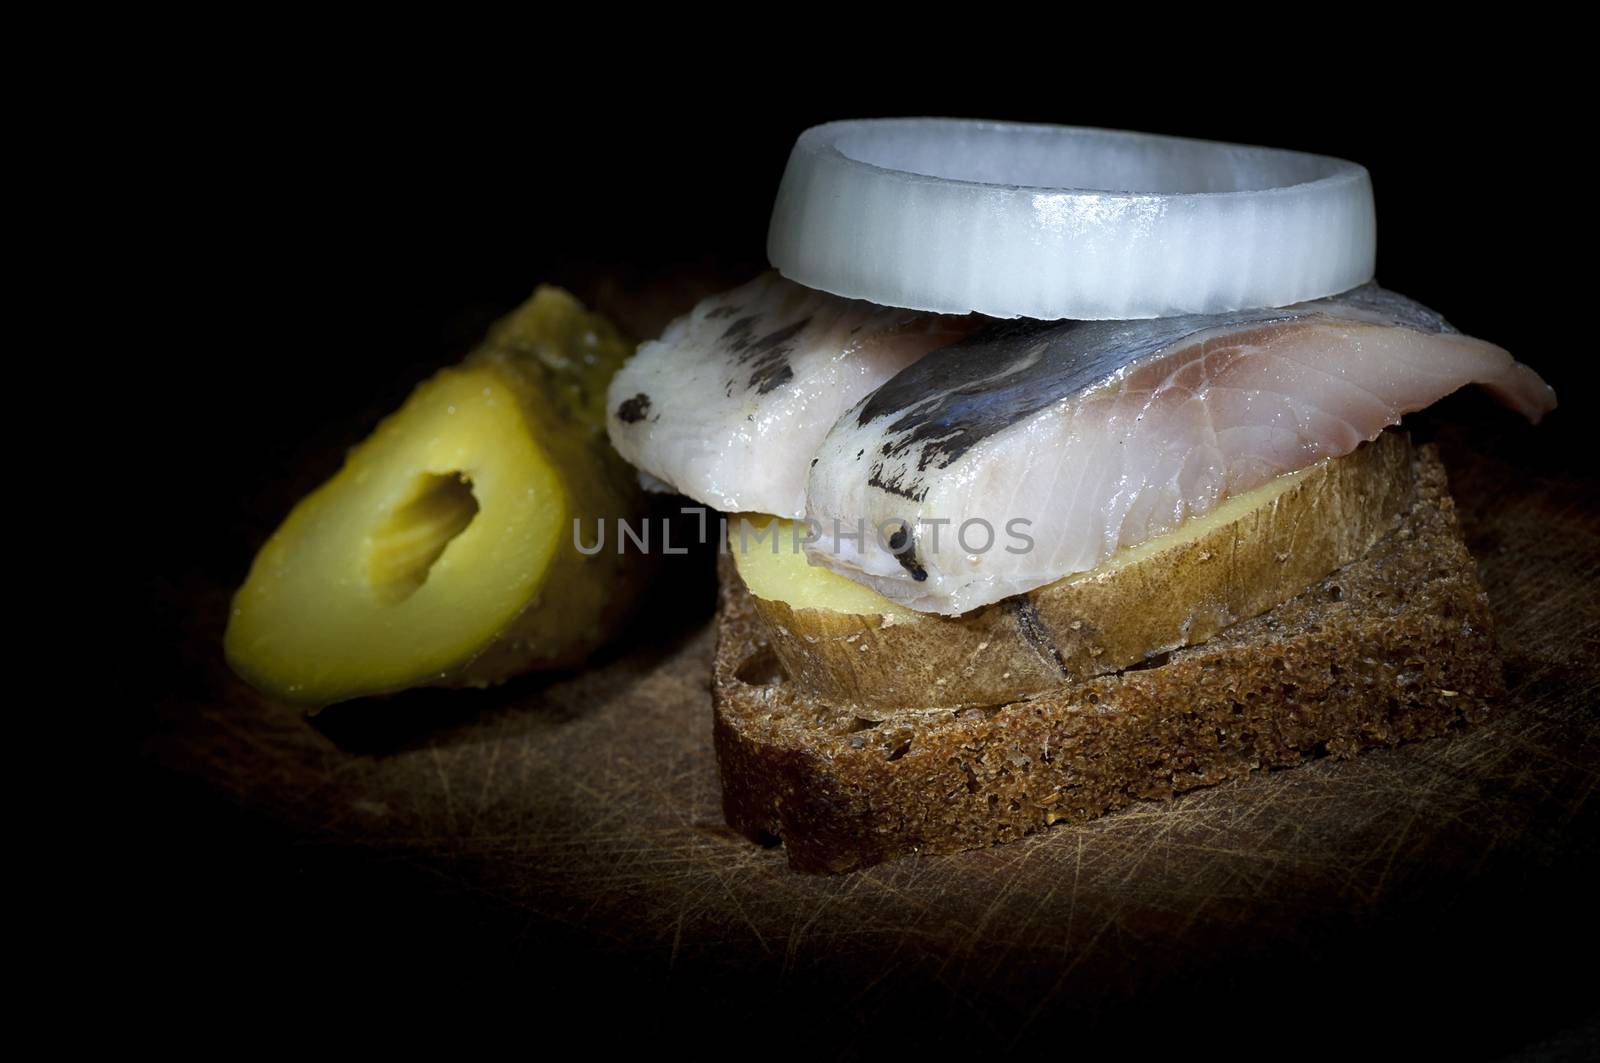 Sandwich made of herring on boiled jacket potato and rye bread